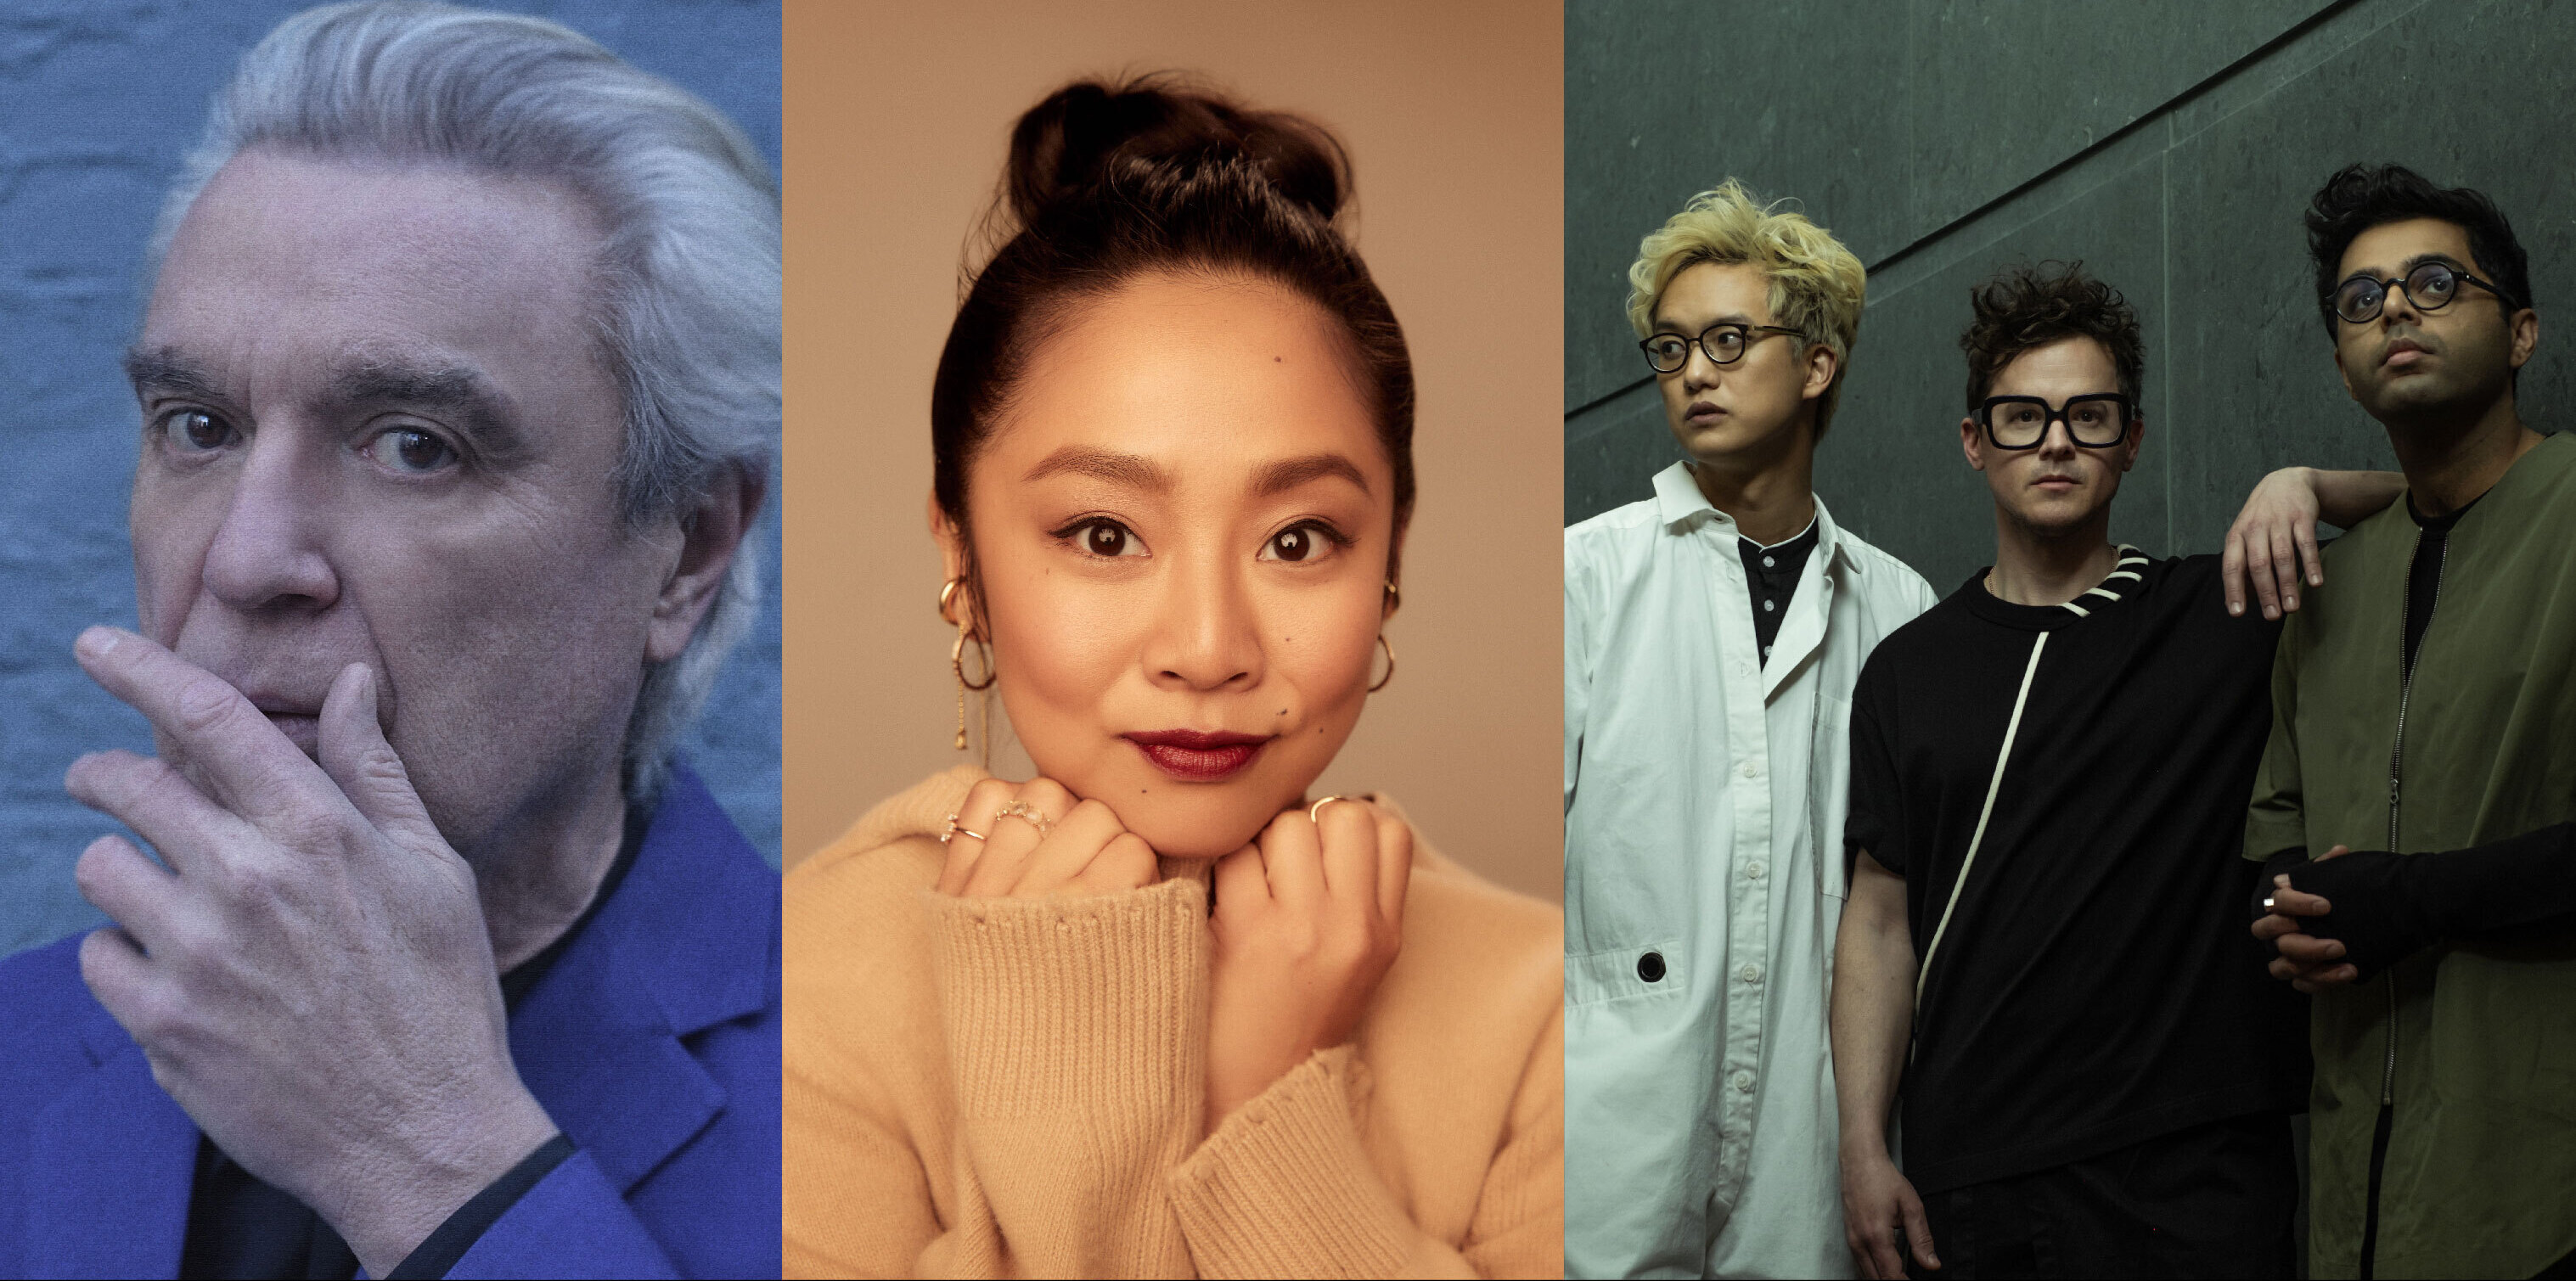 DAVID BYRNE, STEPHANIE HSU AND SON LUX TO PERFORM AT THE OSCARS®